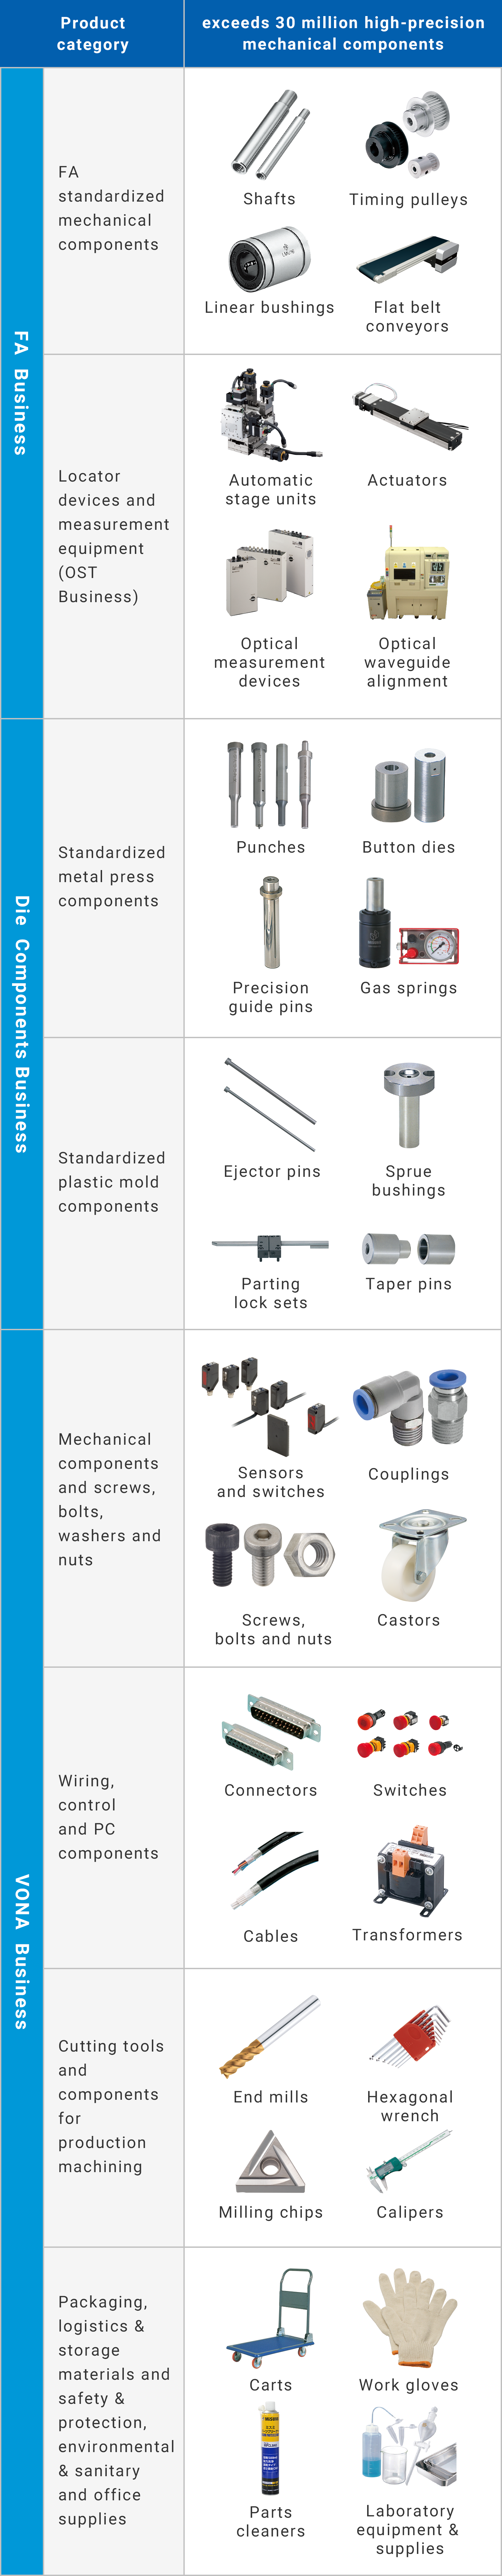 Major Products Handled by the MISUMI Group